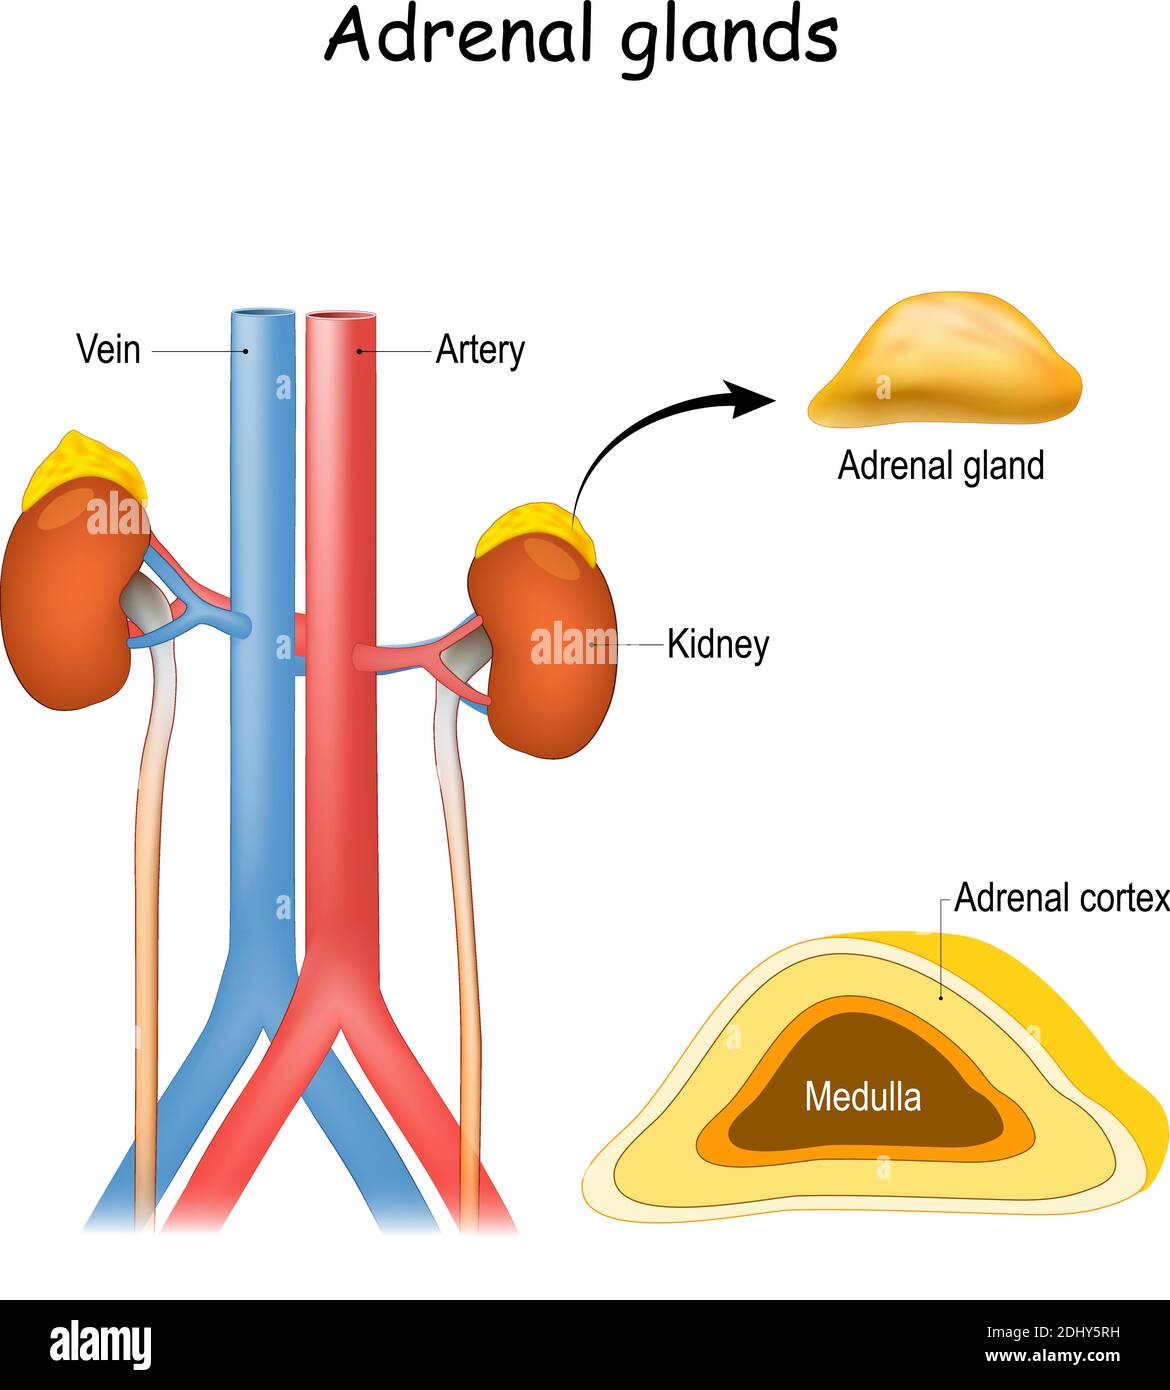 Location of adrenal gland in human body - snoearth